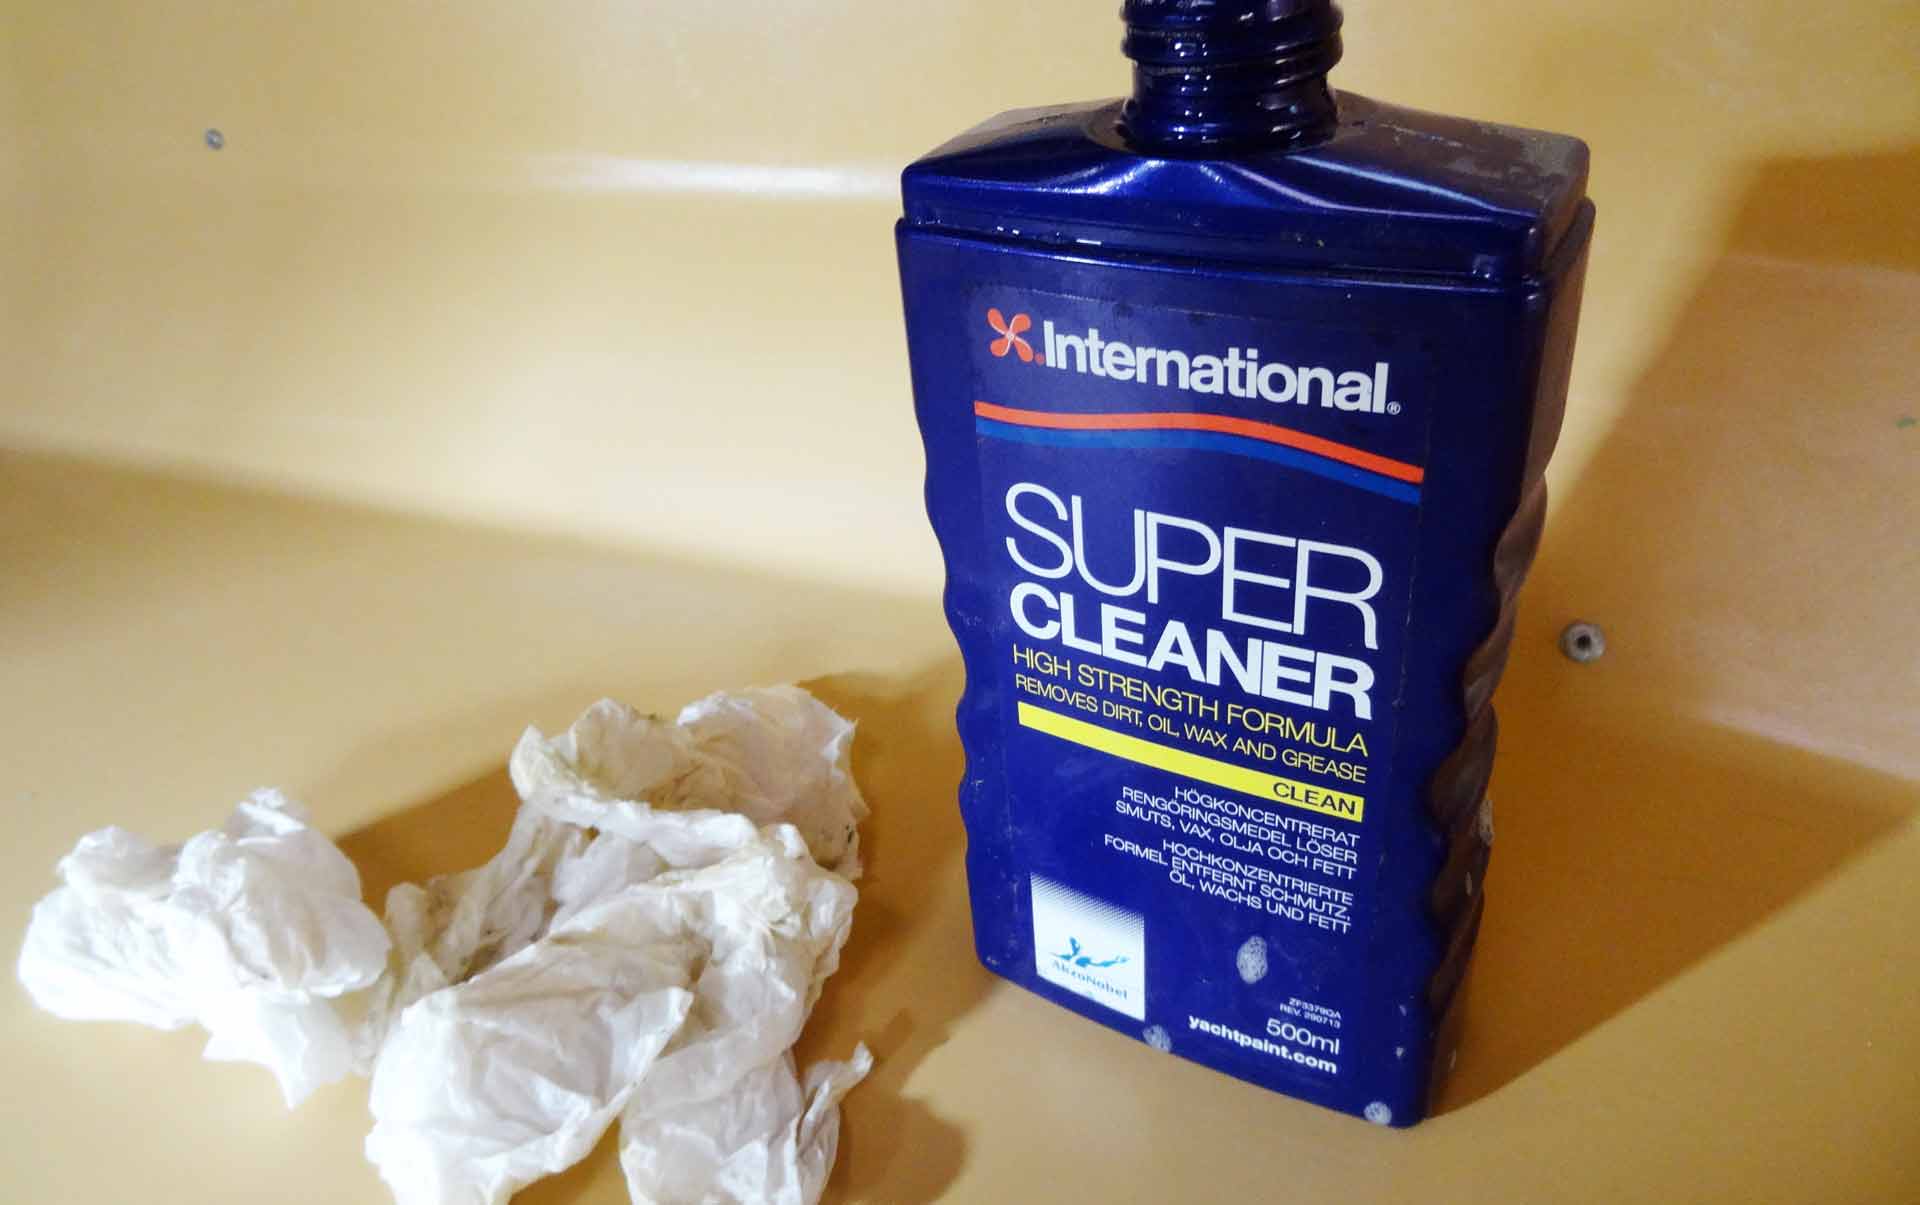 The Weapon of Choice - Super Cleaner by International